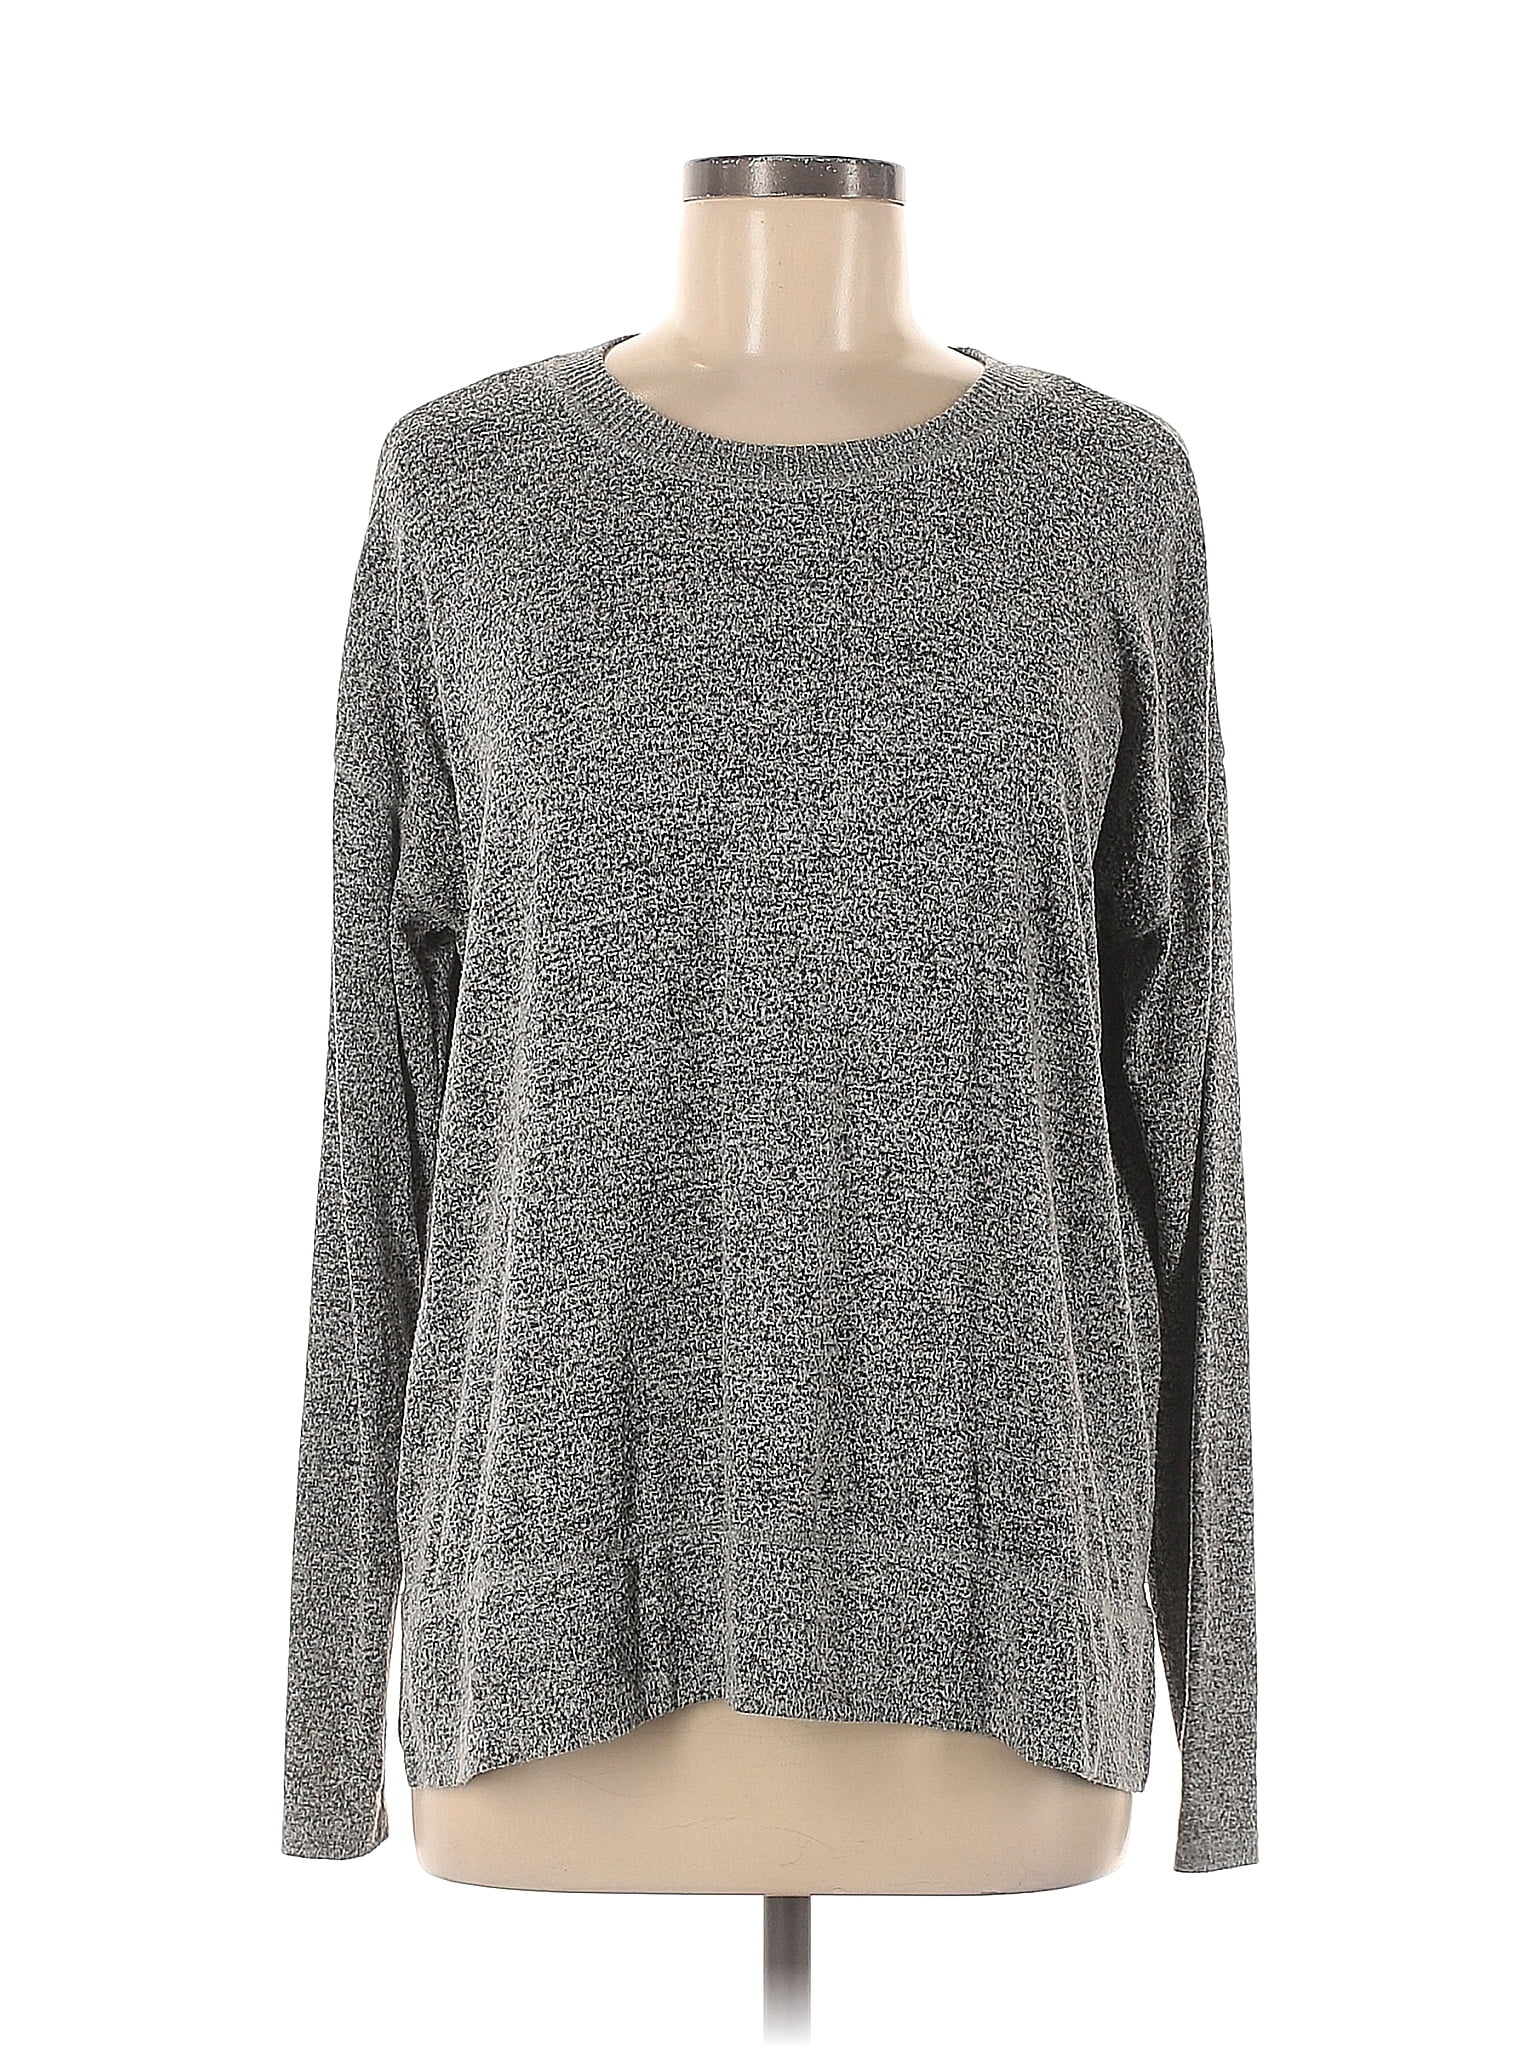 Lucky Brand Color Block Solid Gray Pullover Sweater Size M - 68